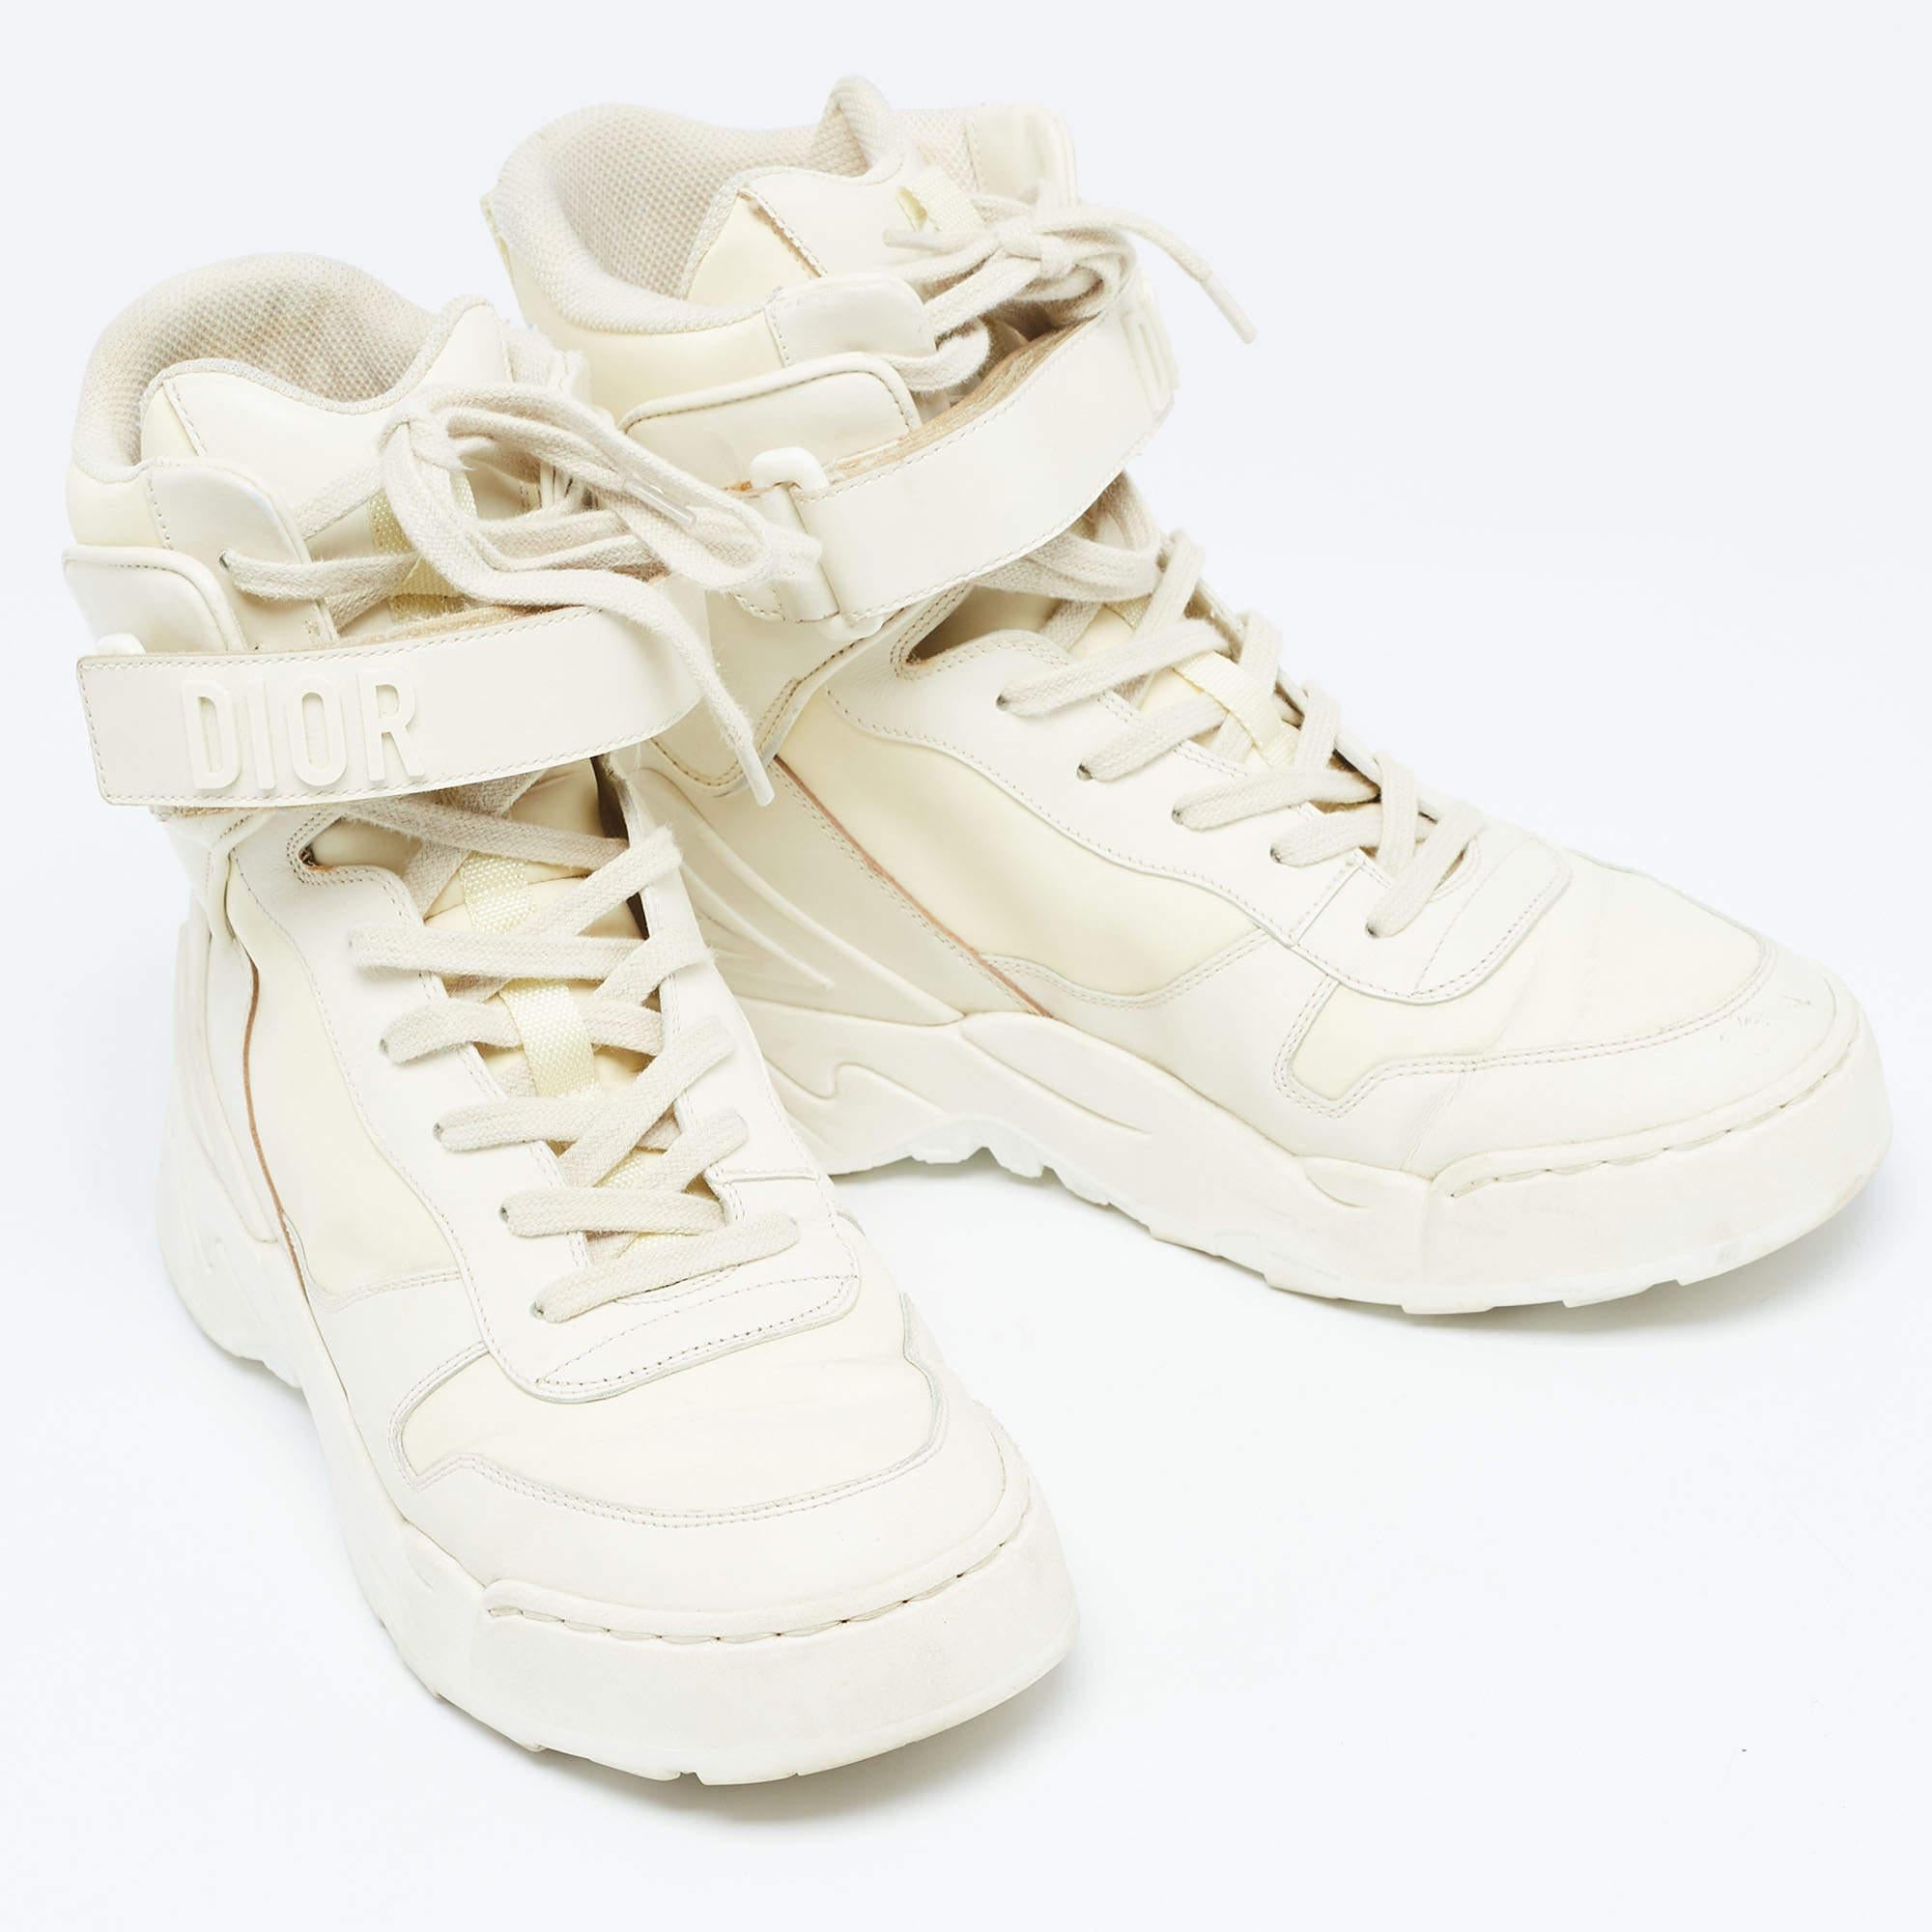 Women's Dior Cream Leather Jumper High Top Sneakers Size 36 For Sale